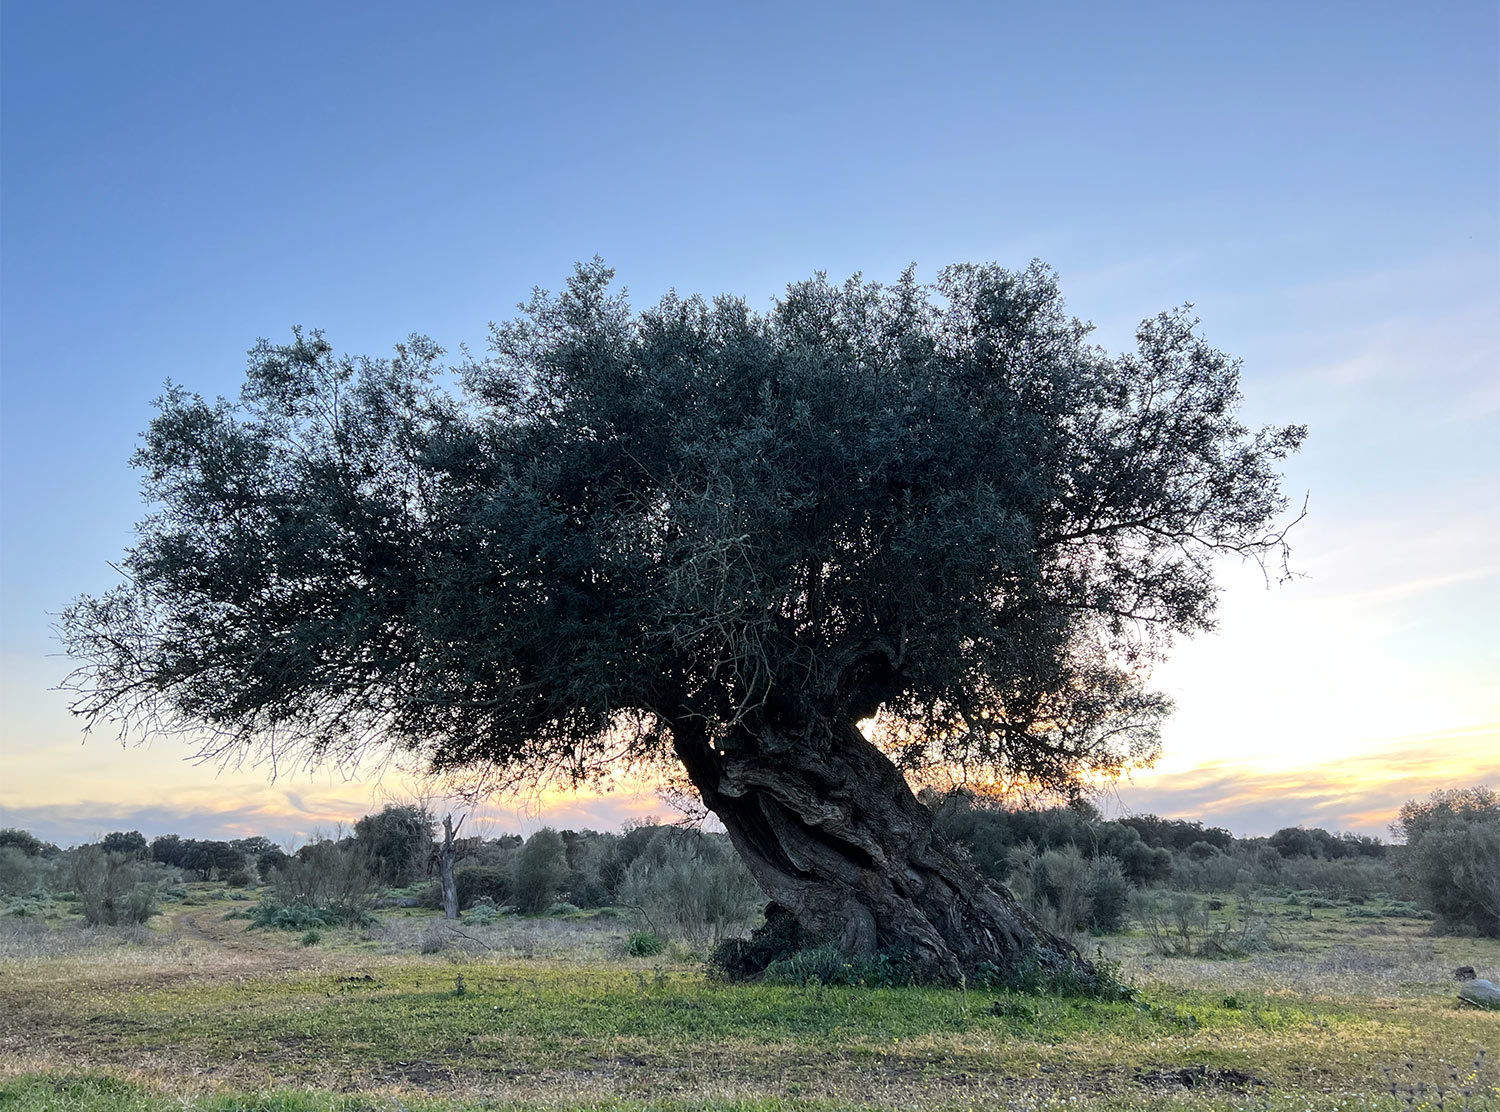 São Lourenço do Barrocal Gnarled ancient olive trees — some thousands of years old — can be found scattered across the 780 hectare estate. The estate produces olive oil. You can do a tour of the groves. I always buy a bottle or two of the oil to take home!